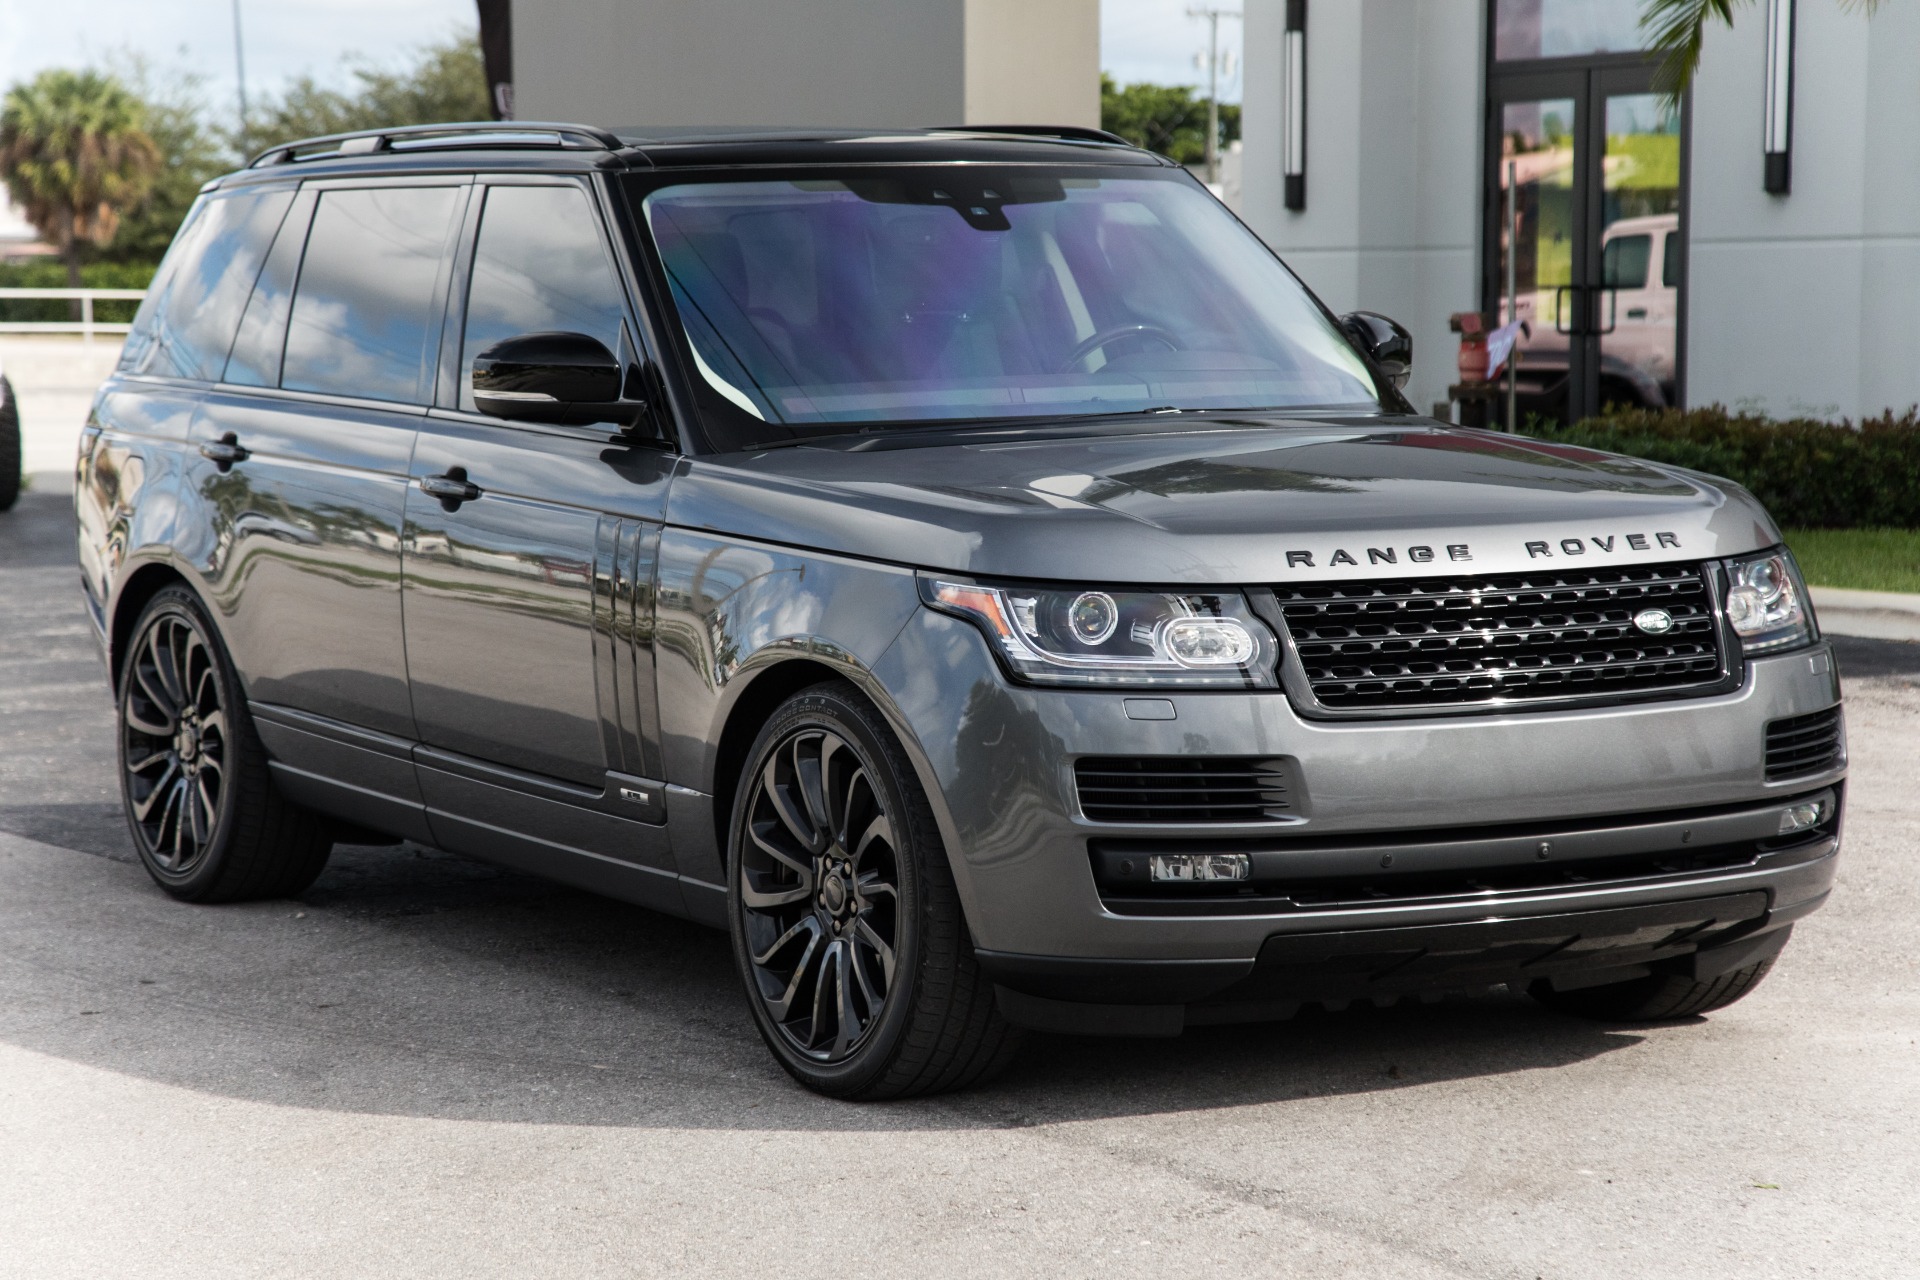 Used 2017 Land Rover Range Rover Supercharged LWB For Sale 82 900 